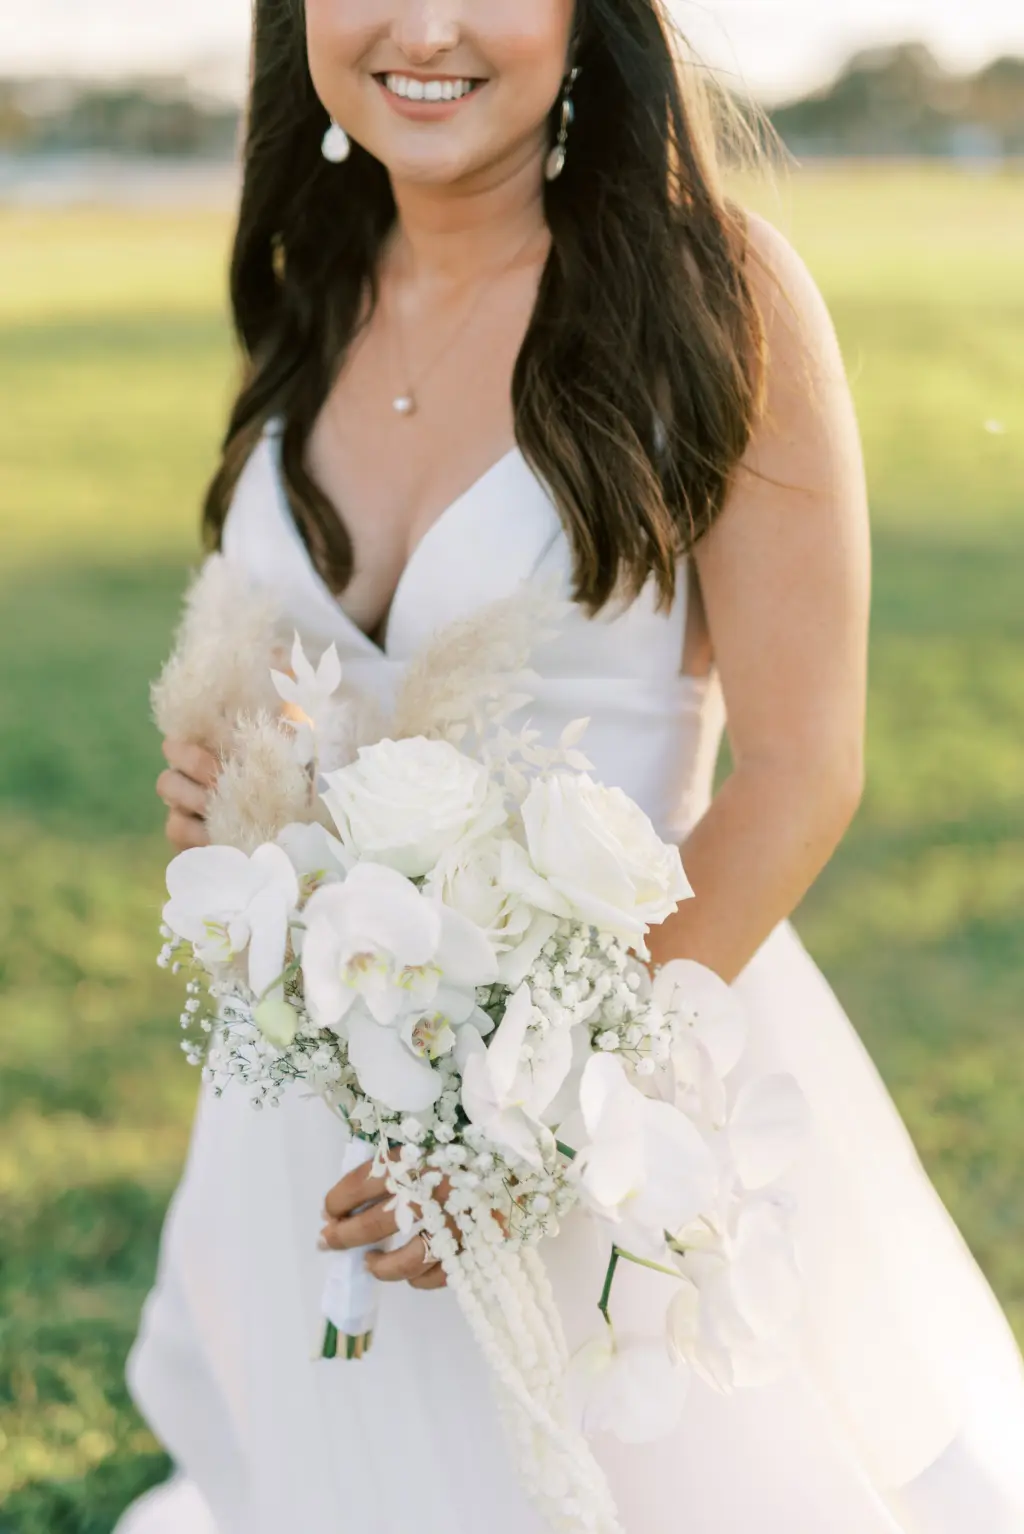 Monochromatic White Wedding Bouquet with Cascading Wisteria, Orchids, Roses, Baby's Breath, and Boho Pampas Grass Inspiration